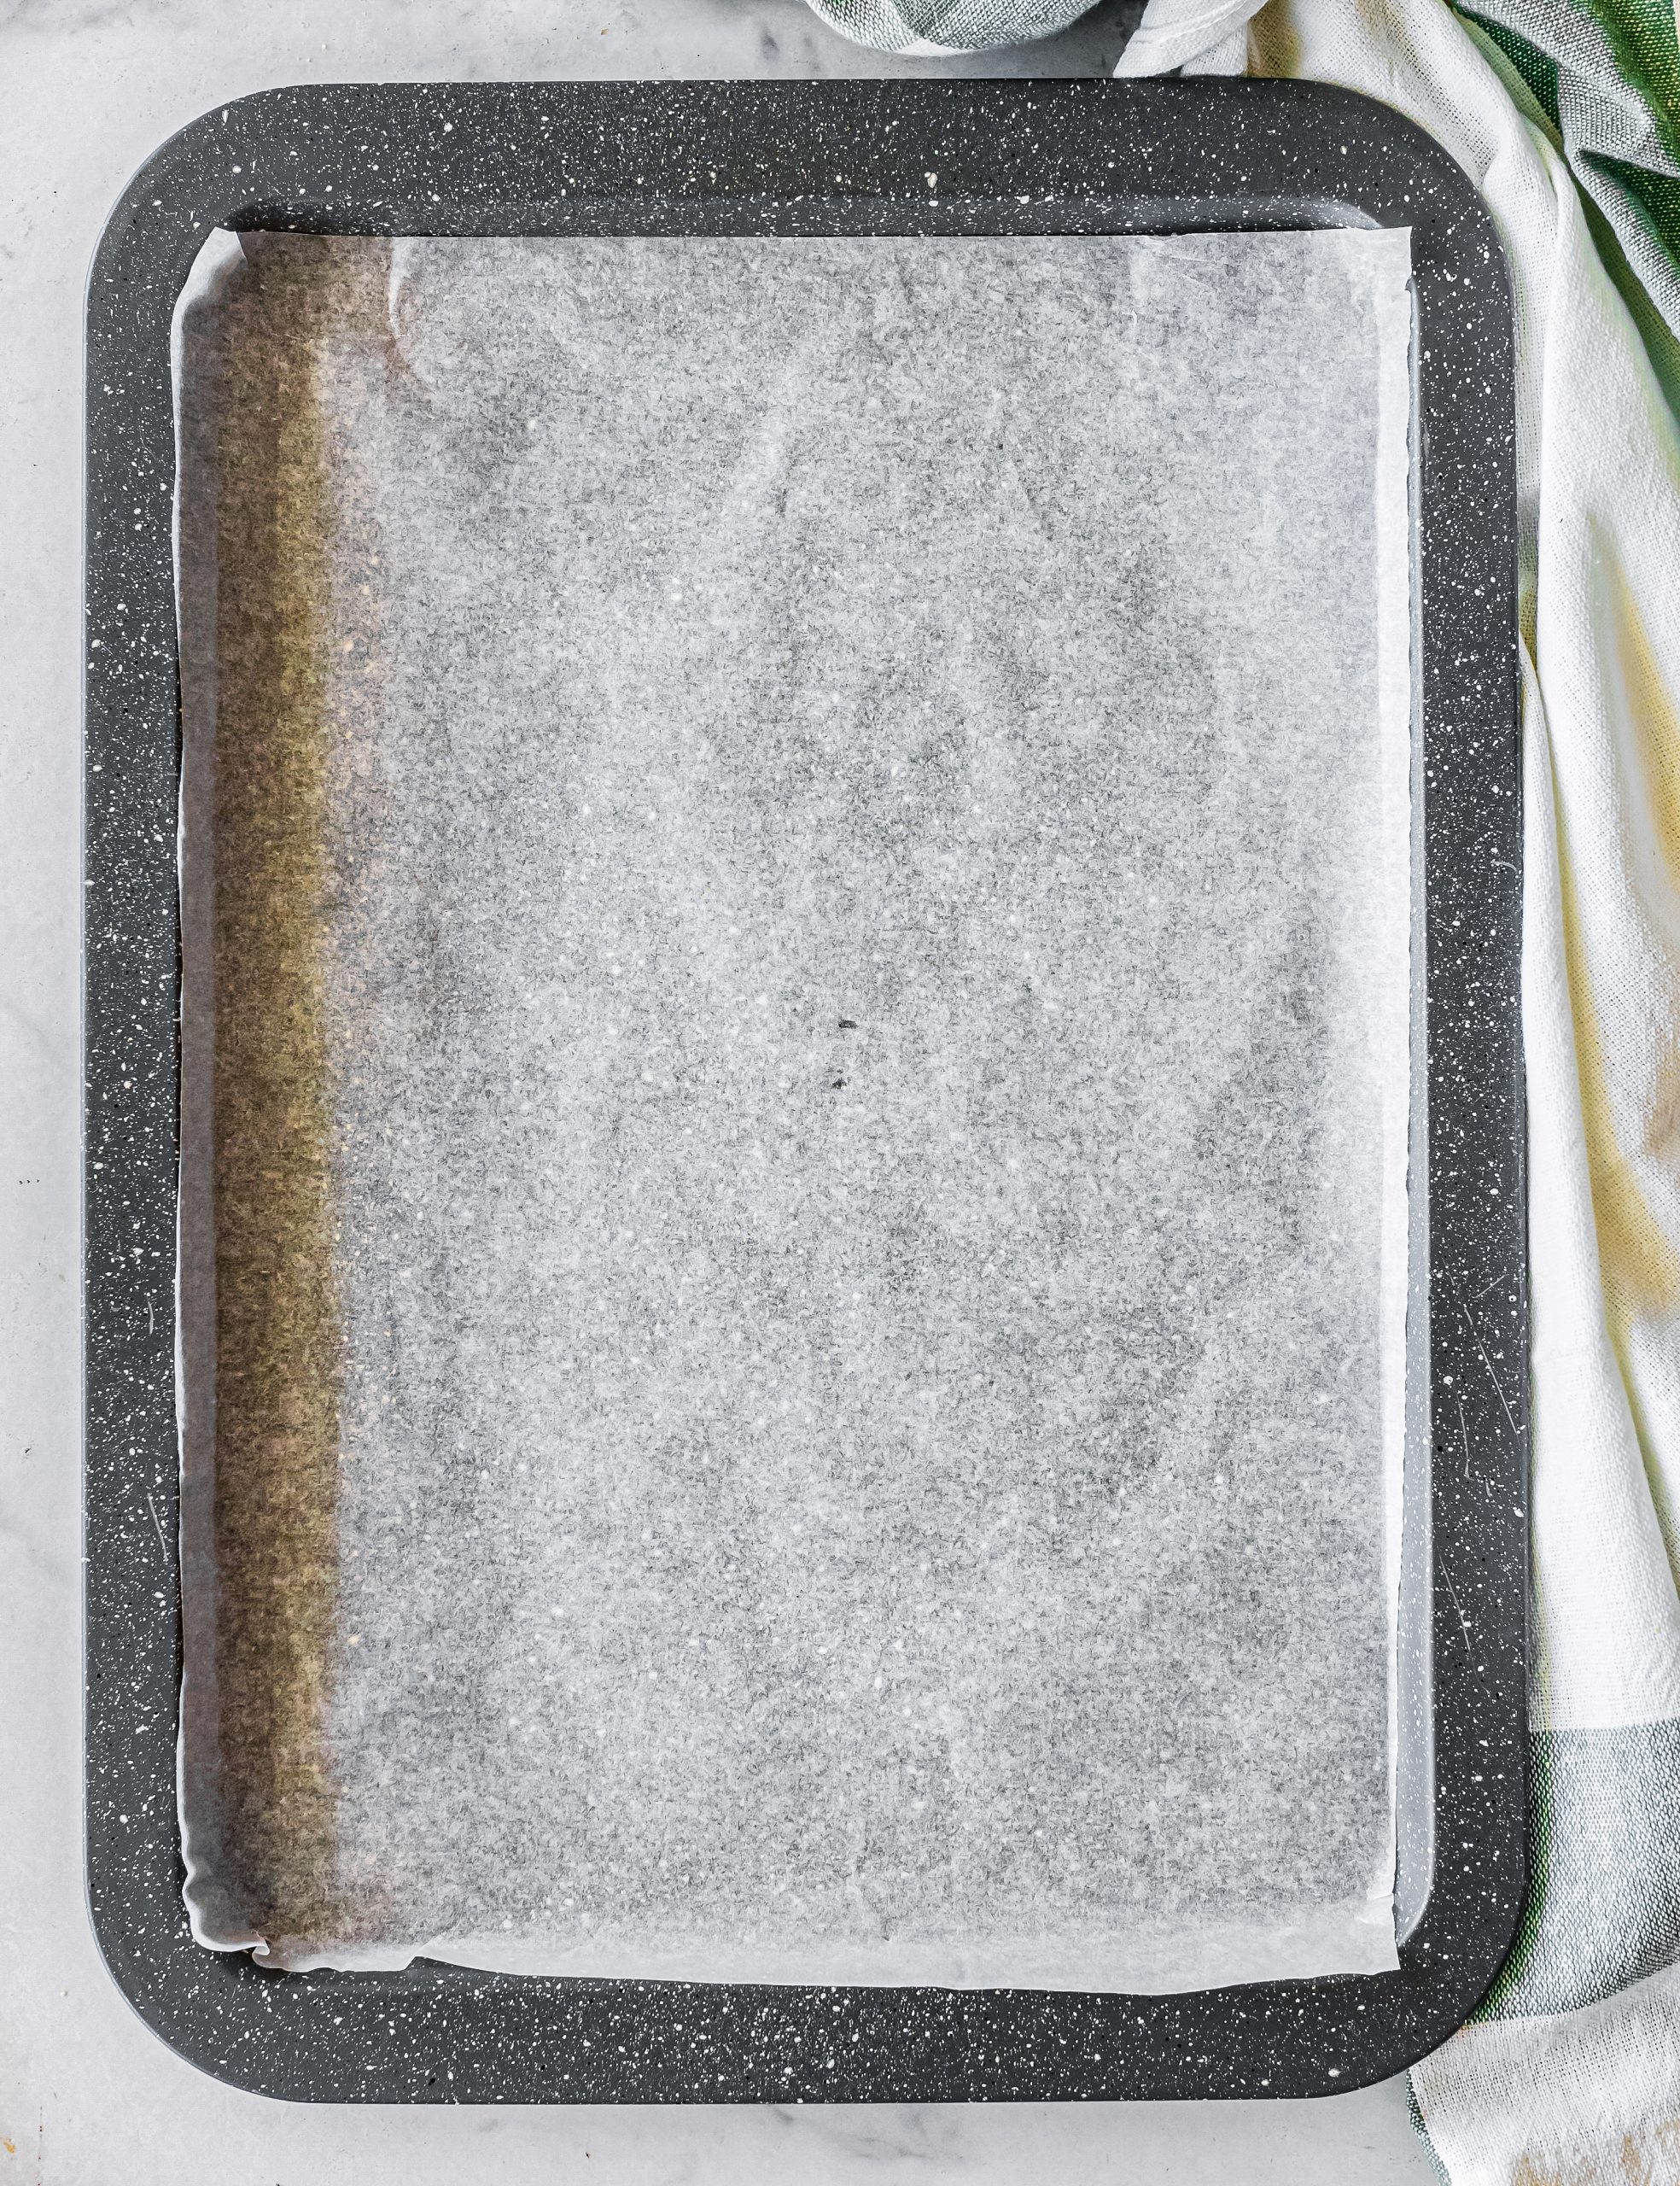 line a baking sheet with parchment paper